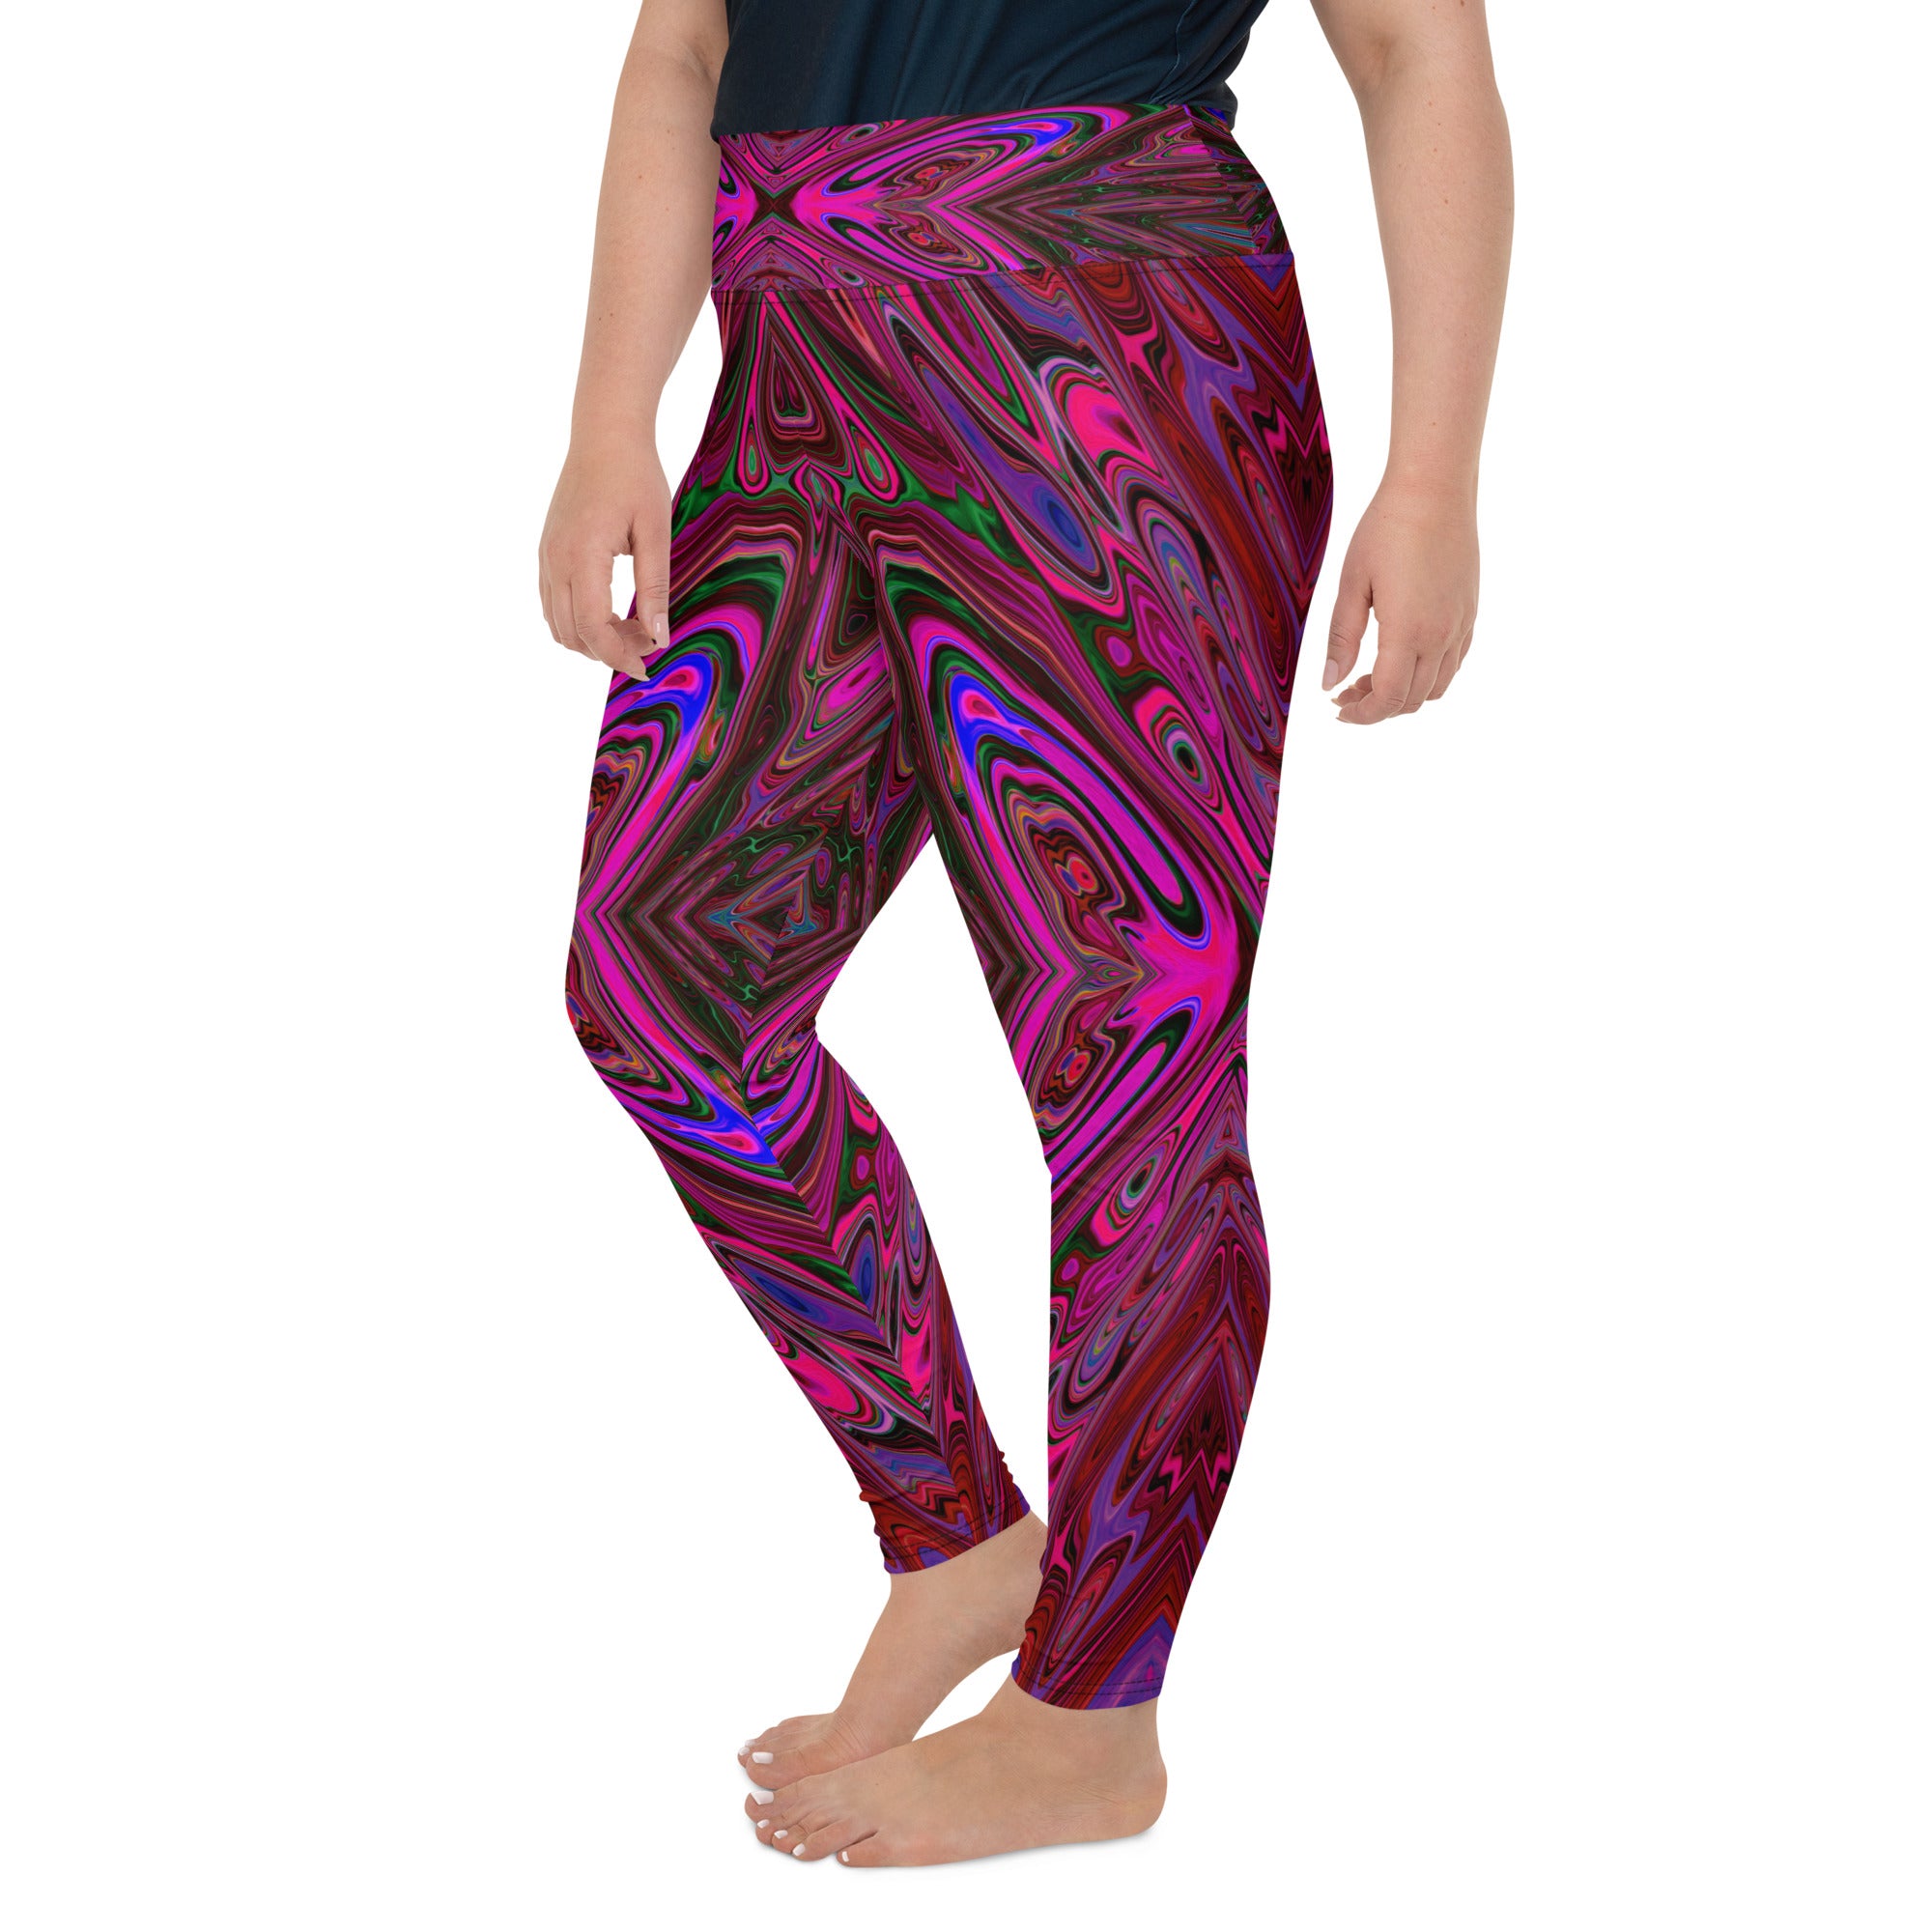 Plus Size Leggings, Trippy Hot Pink, Red and Blue Abstract Butterfly